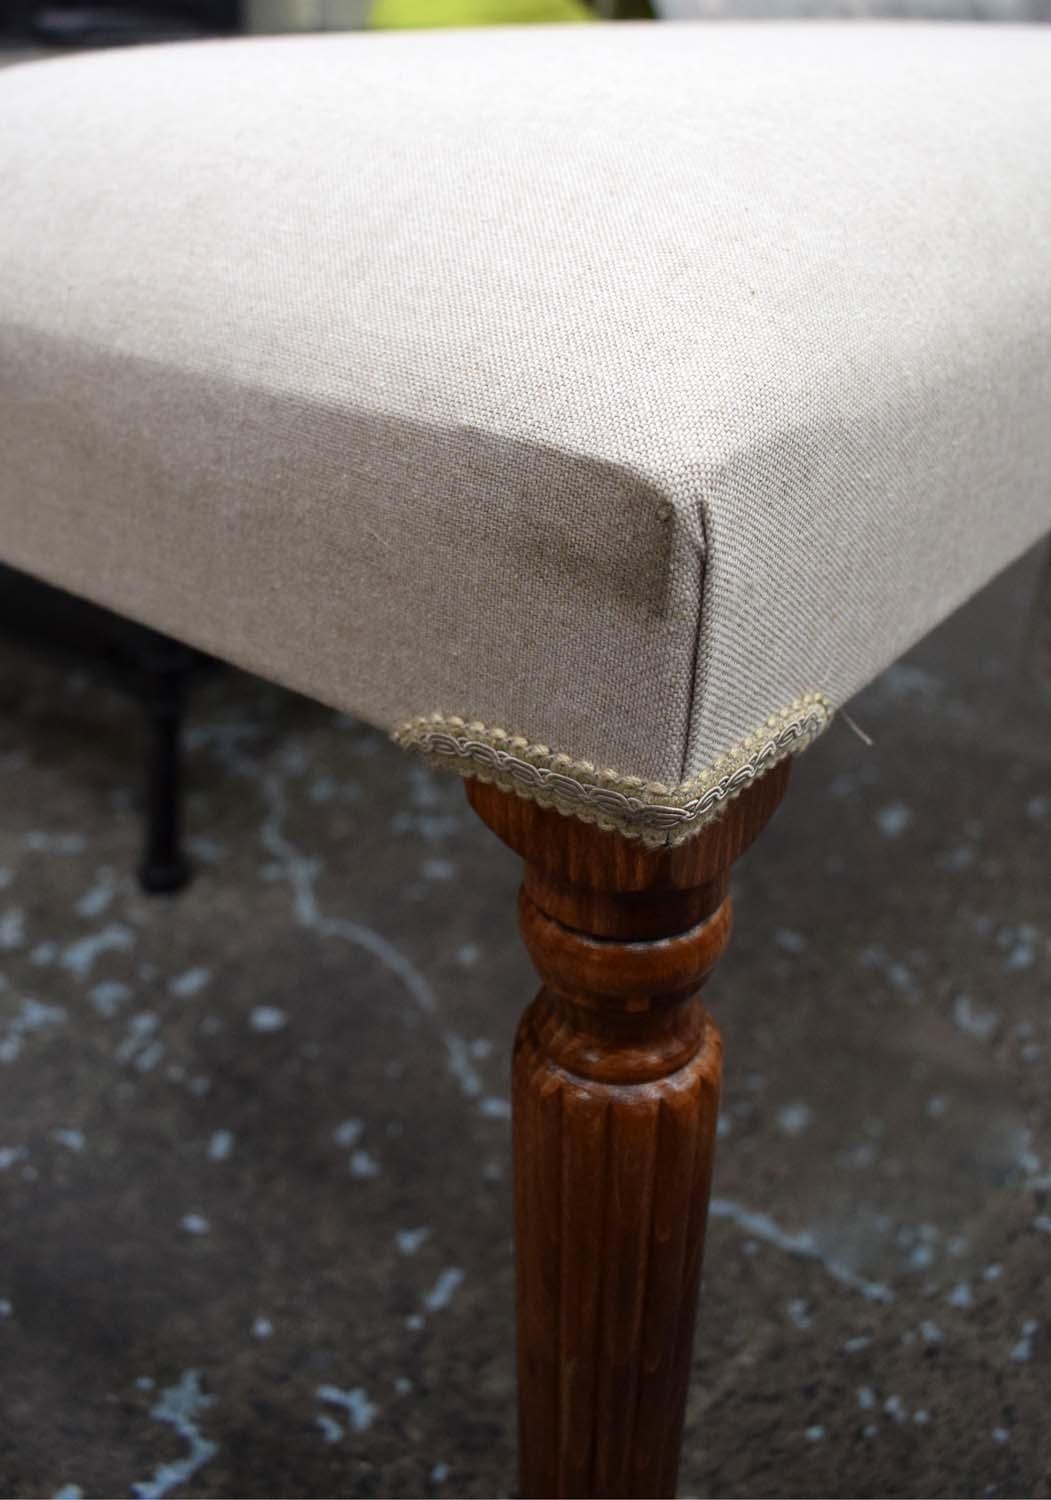 HALL SEAT, 151cm L x 47cm H x 40cm D, with linen upholstery. - Image 8 of 8